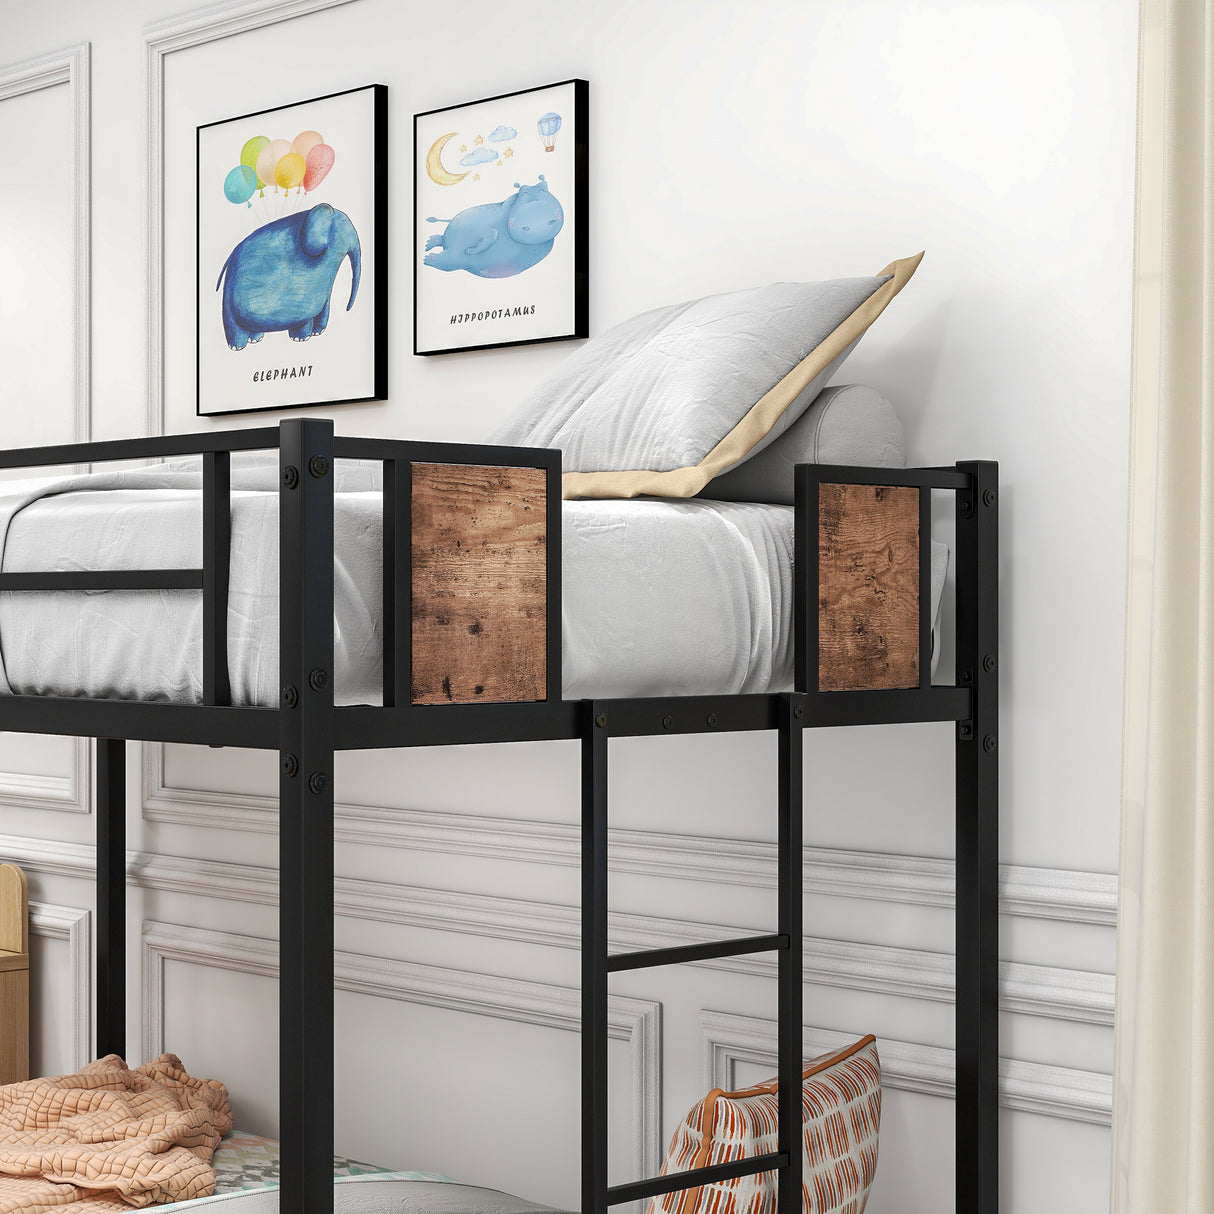 Bunk Bed Twin Over Twin Heavy Metal Bunk Bed with Ladder and Guardrail, Metal Bunk Bed, Storage Space, No Box Spring Needed Black - Home Elegance USA